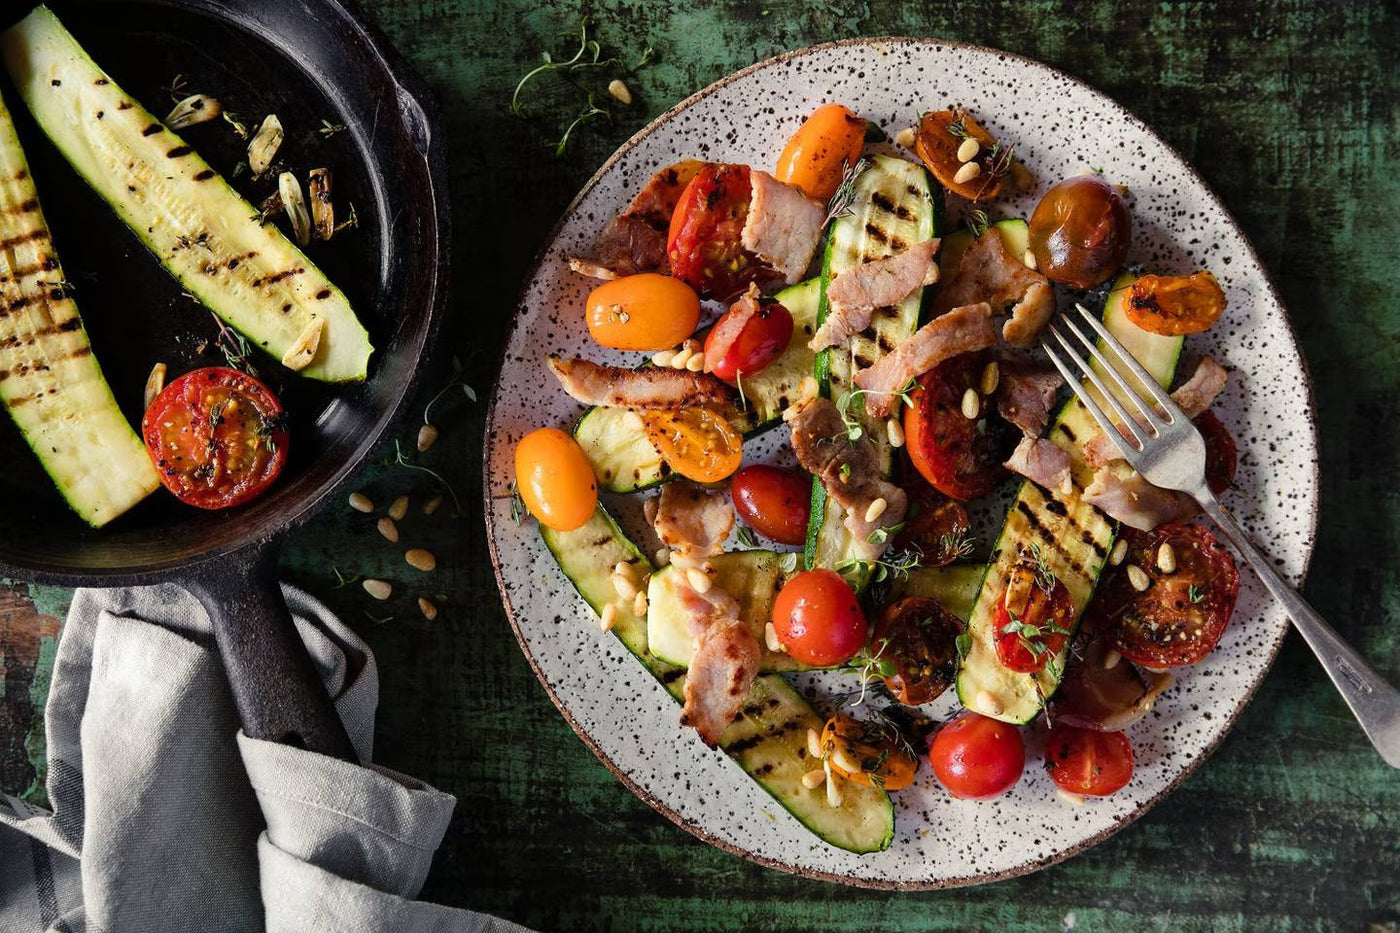 This quick and easy Warm Tomato, Courgette & Bacon Salad also happens to be gluten-free!